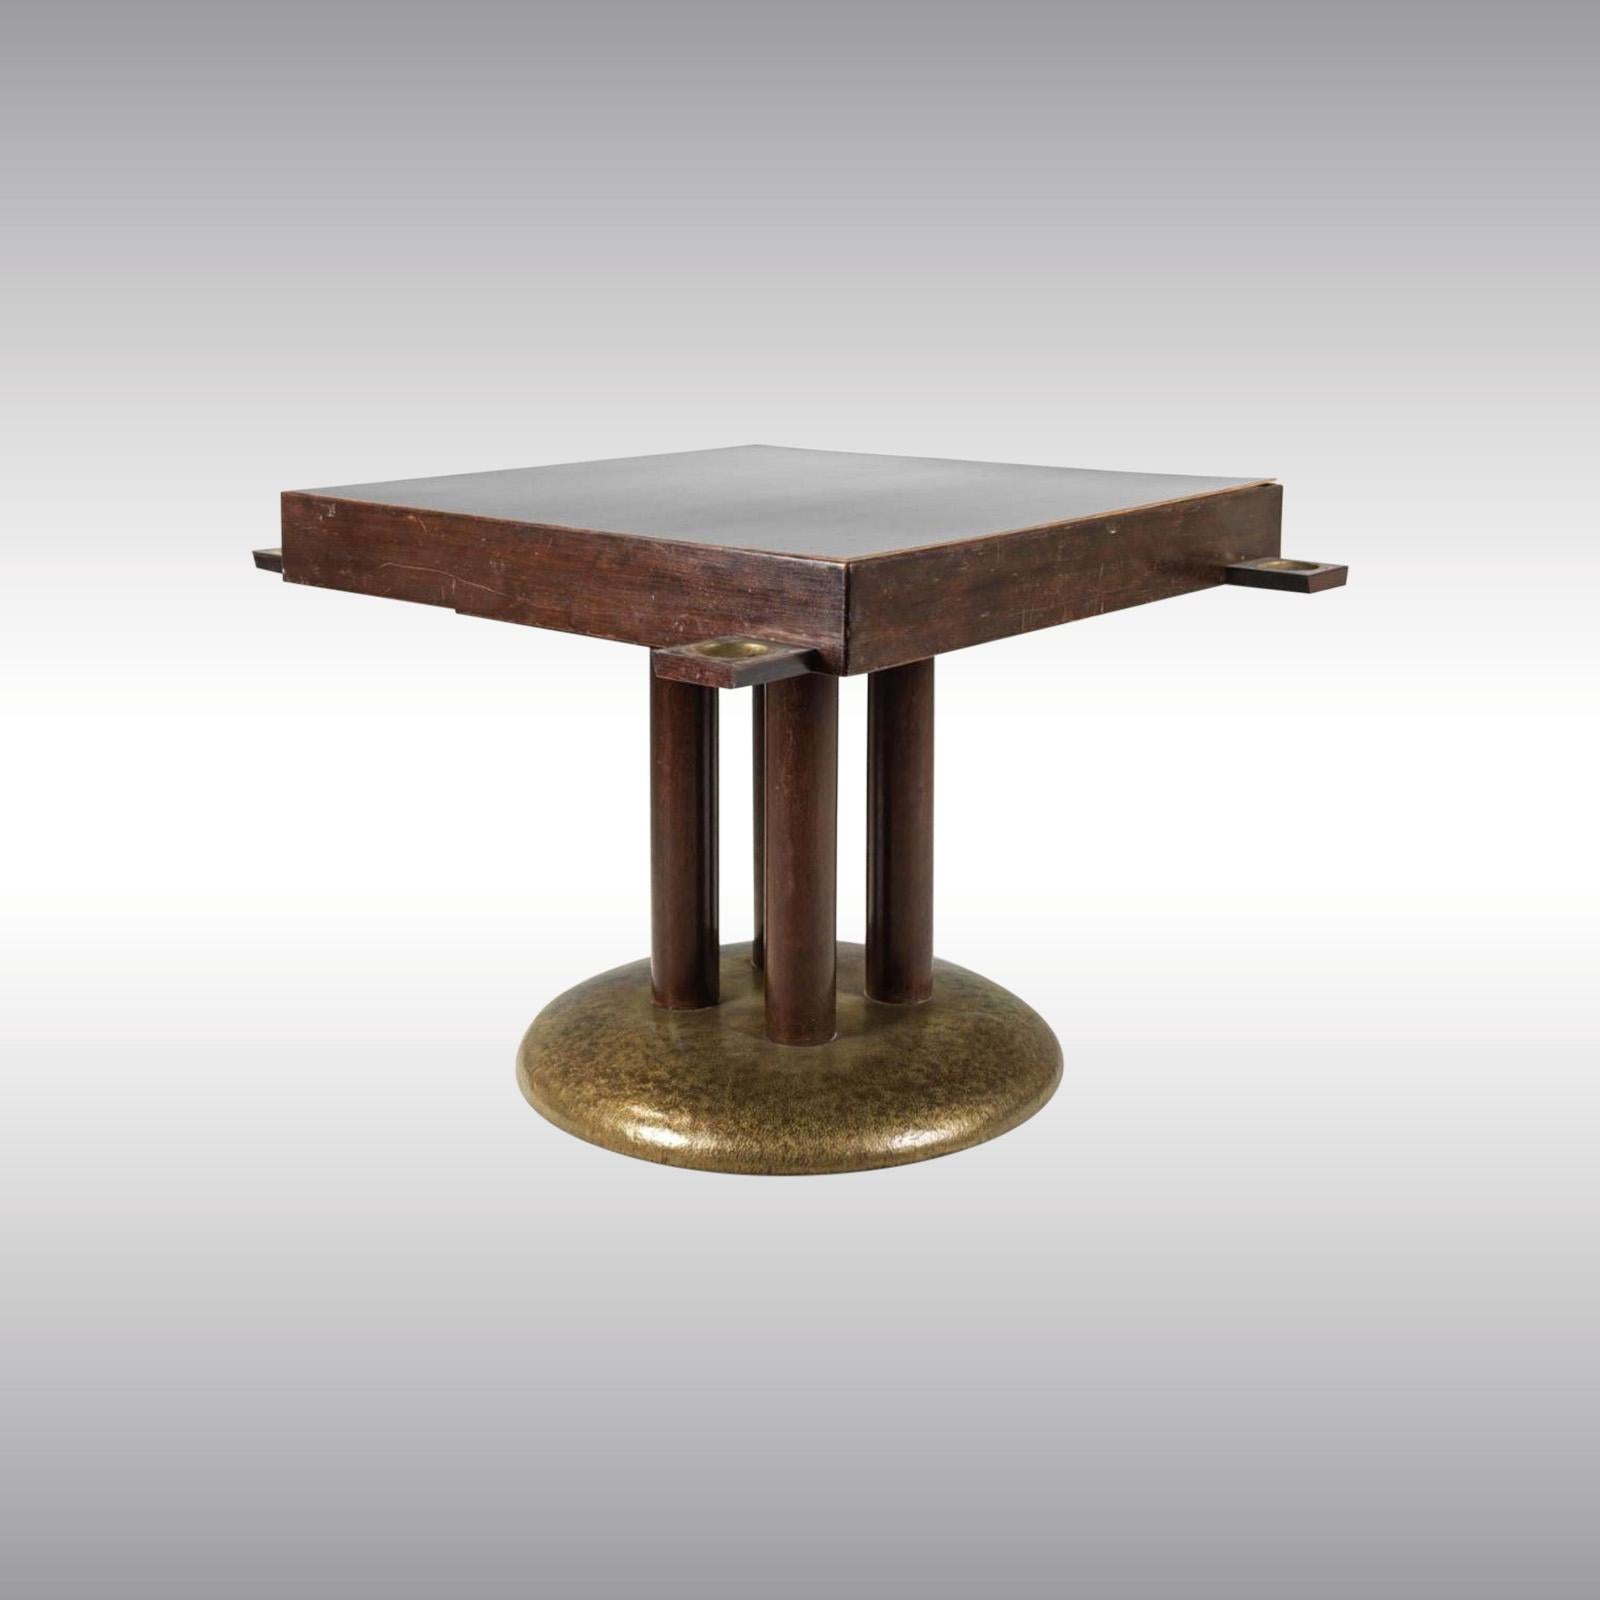 Jugendstil Original Gambling Table in the Style of Adolf Loos 1910 with Brass Chip-Bowls For Sale